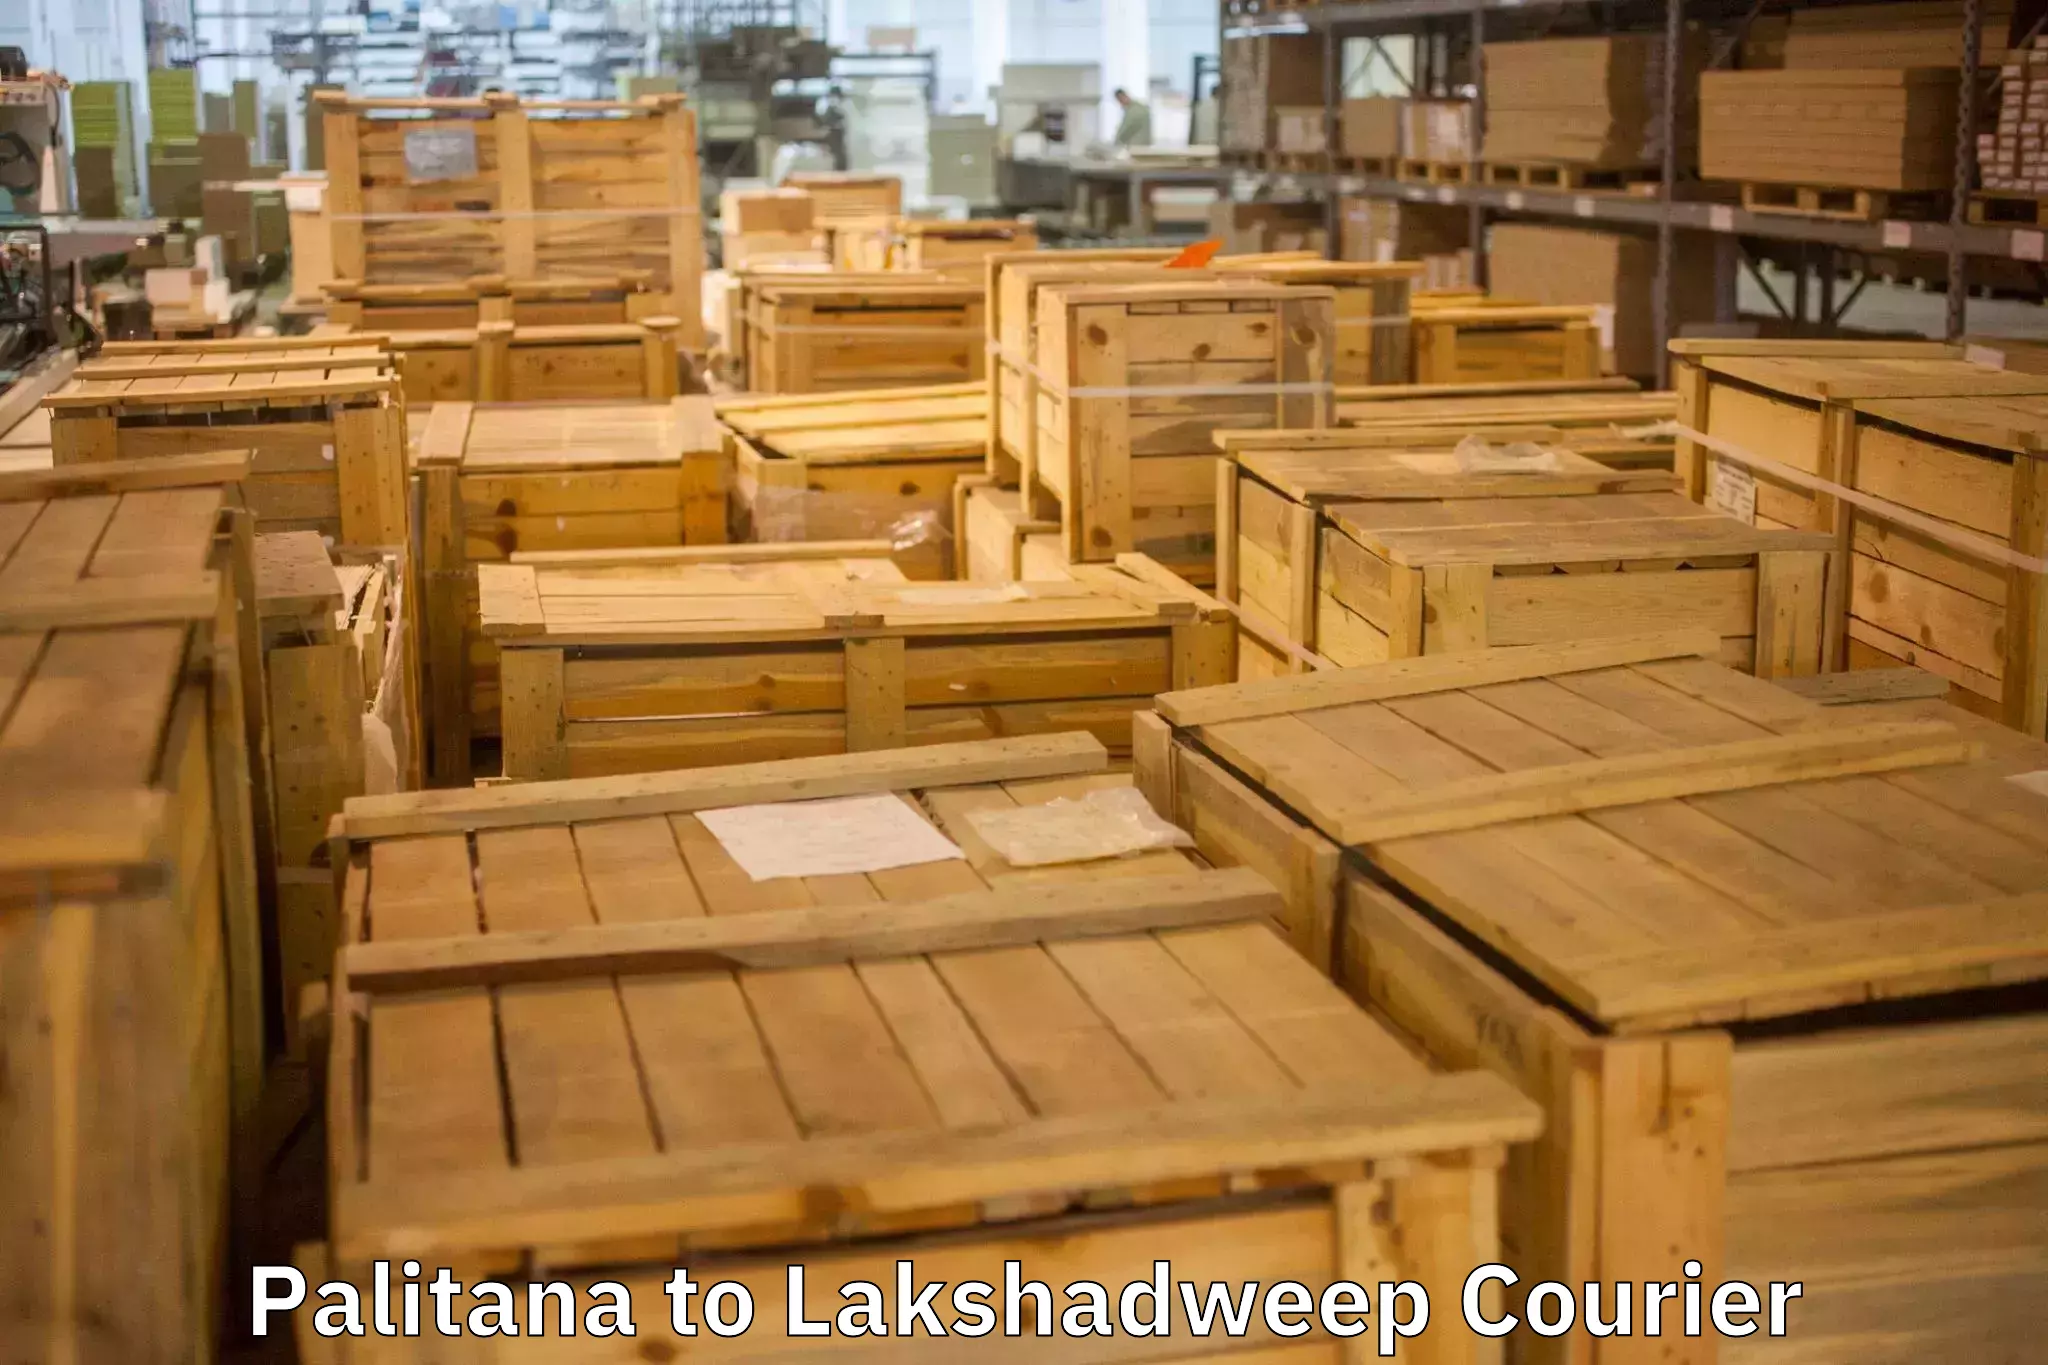 Moving and storage services Palitana to Lakshadweep